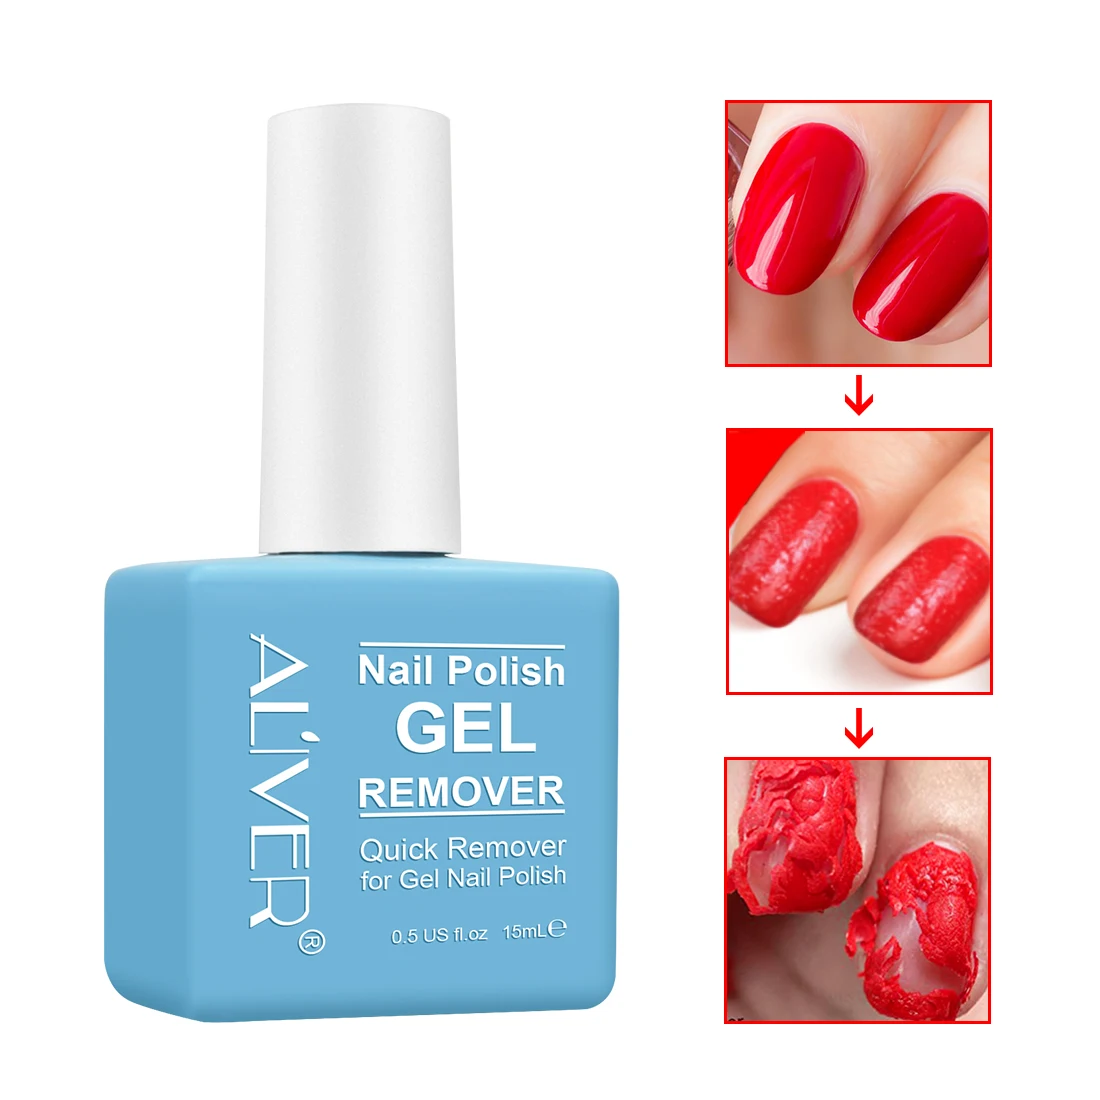 Magic Nail Polish Remover That Quickly And Easily Removes Nail Gel In 3 ...